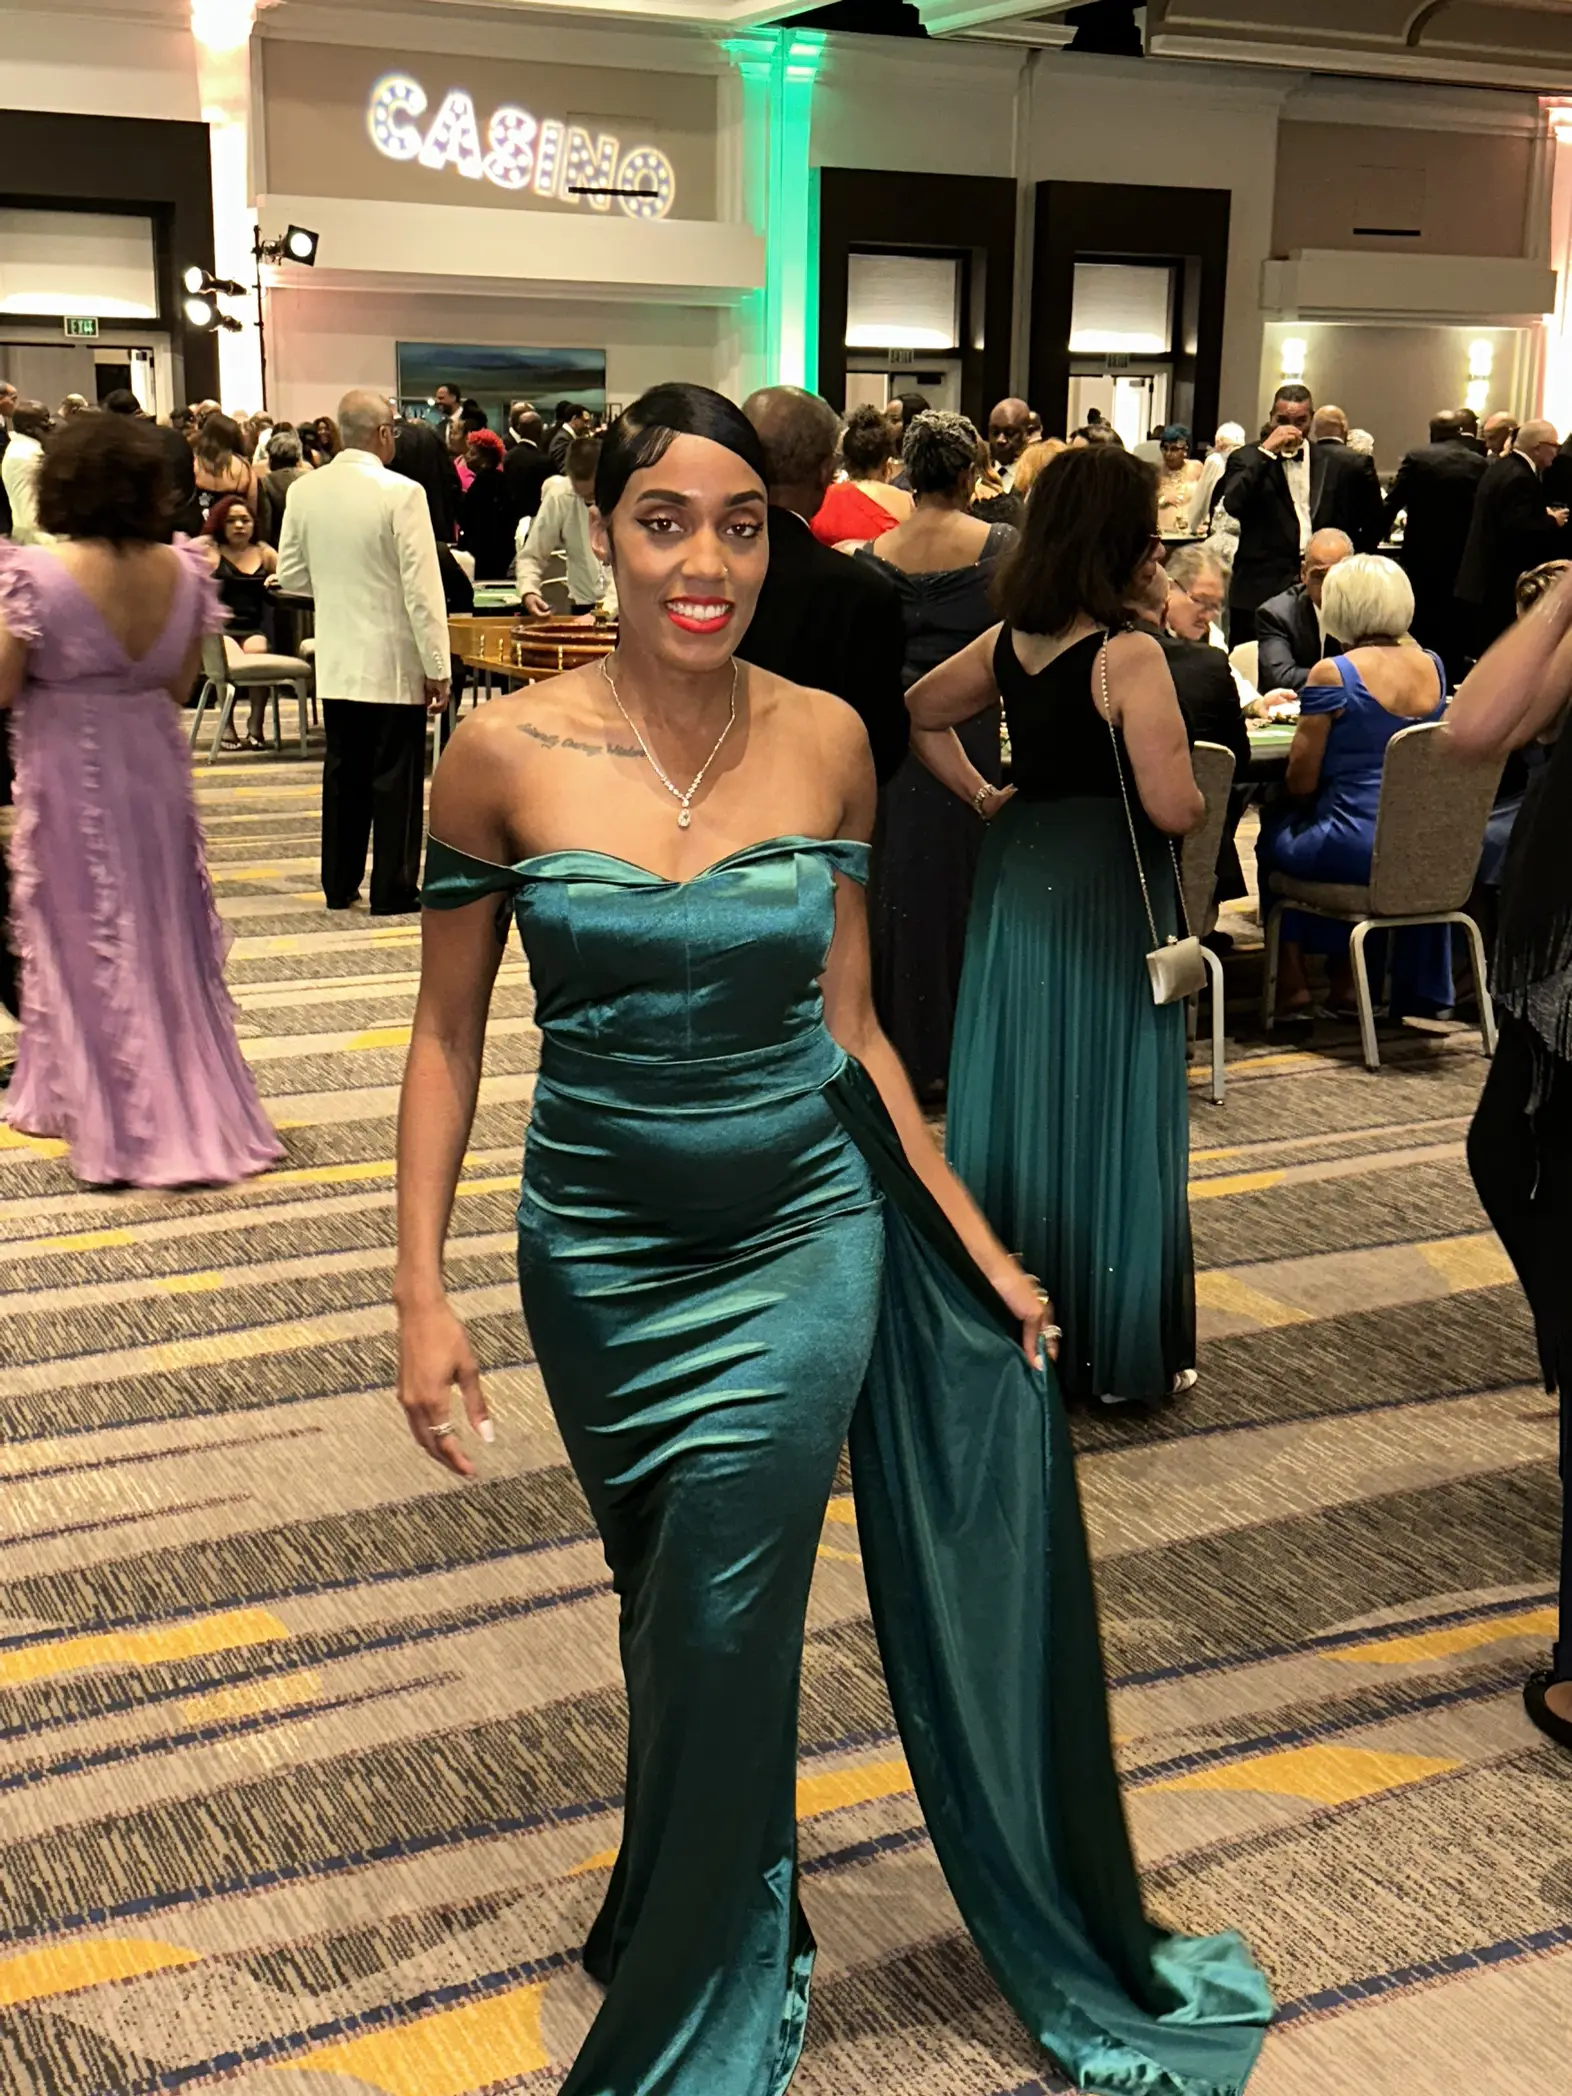 $30 Shein Formal Dress, Gallery posted by Gourmetlashay